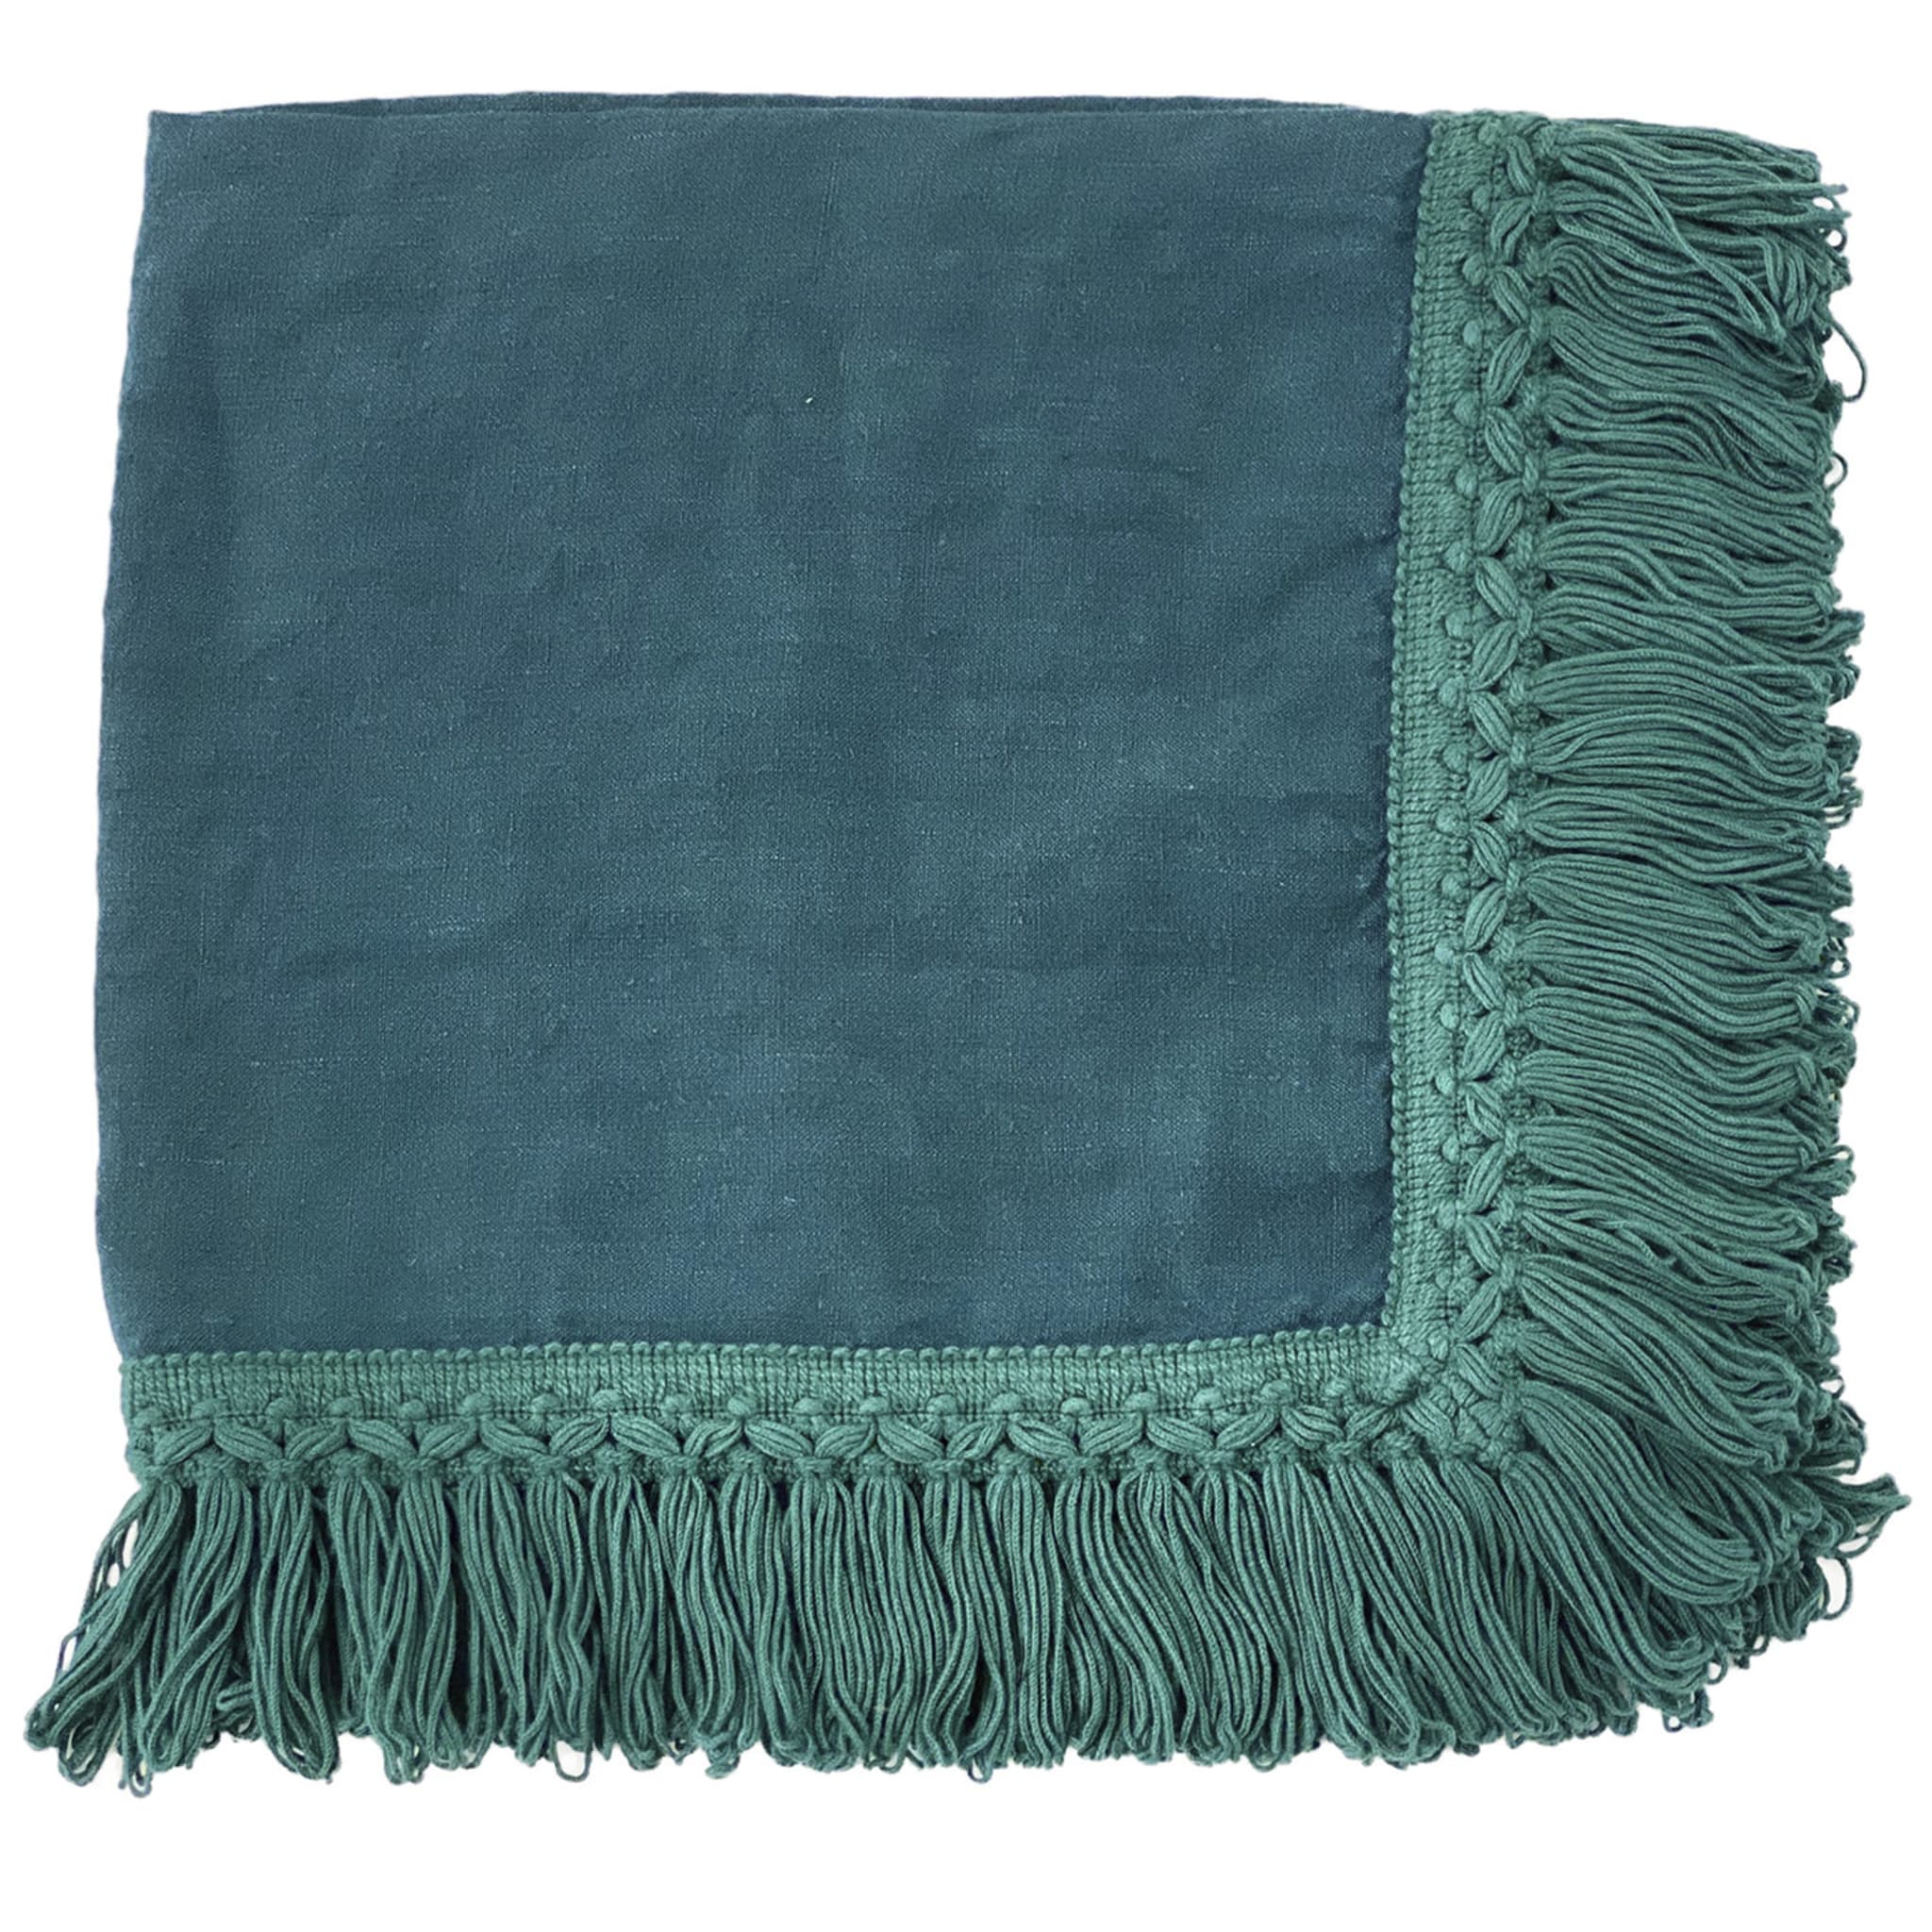 Set of 4 Teal Napkins with Long Fringes - Main view